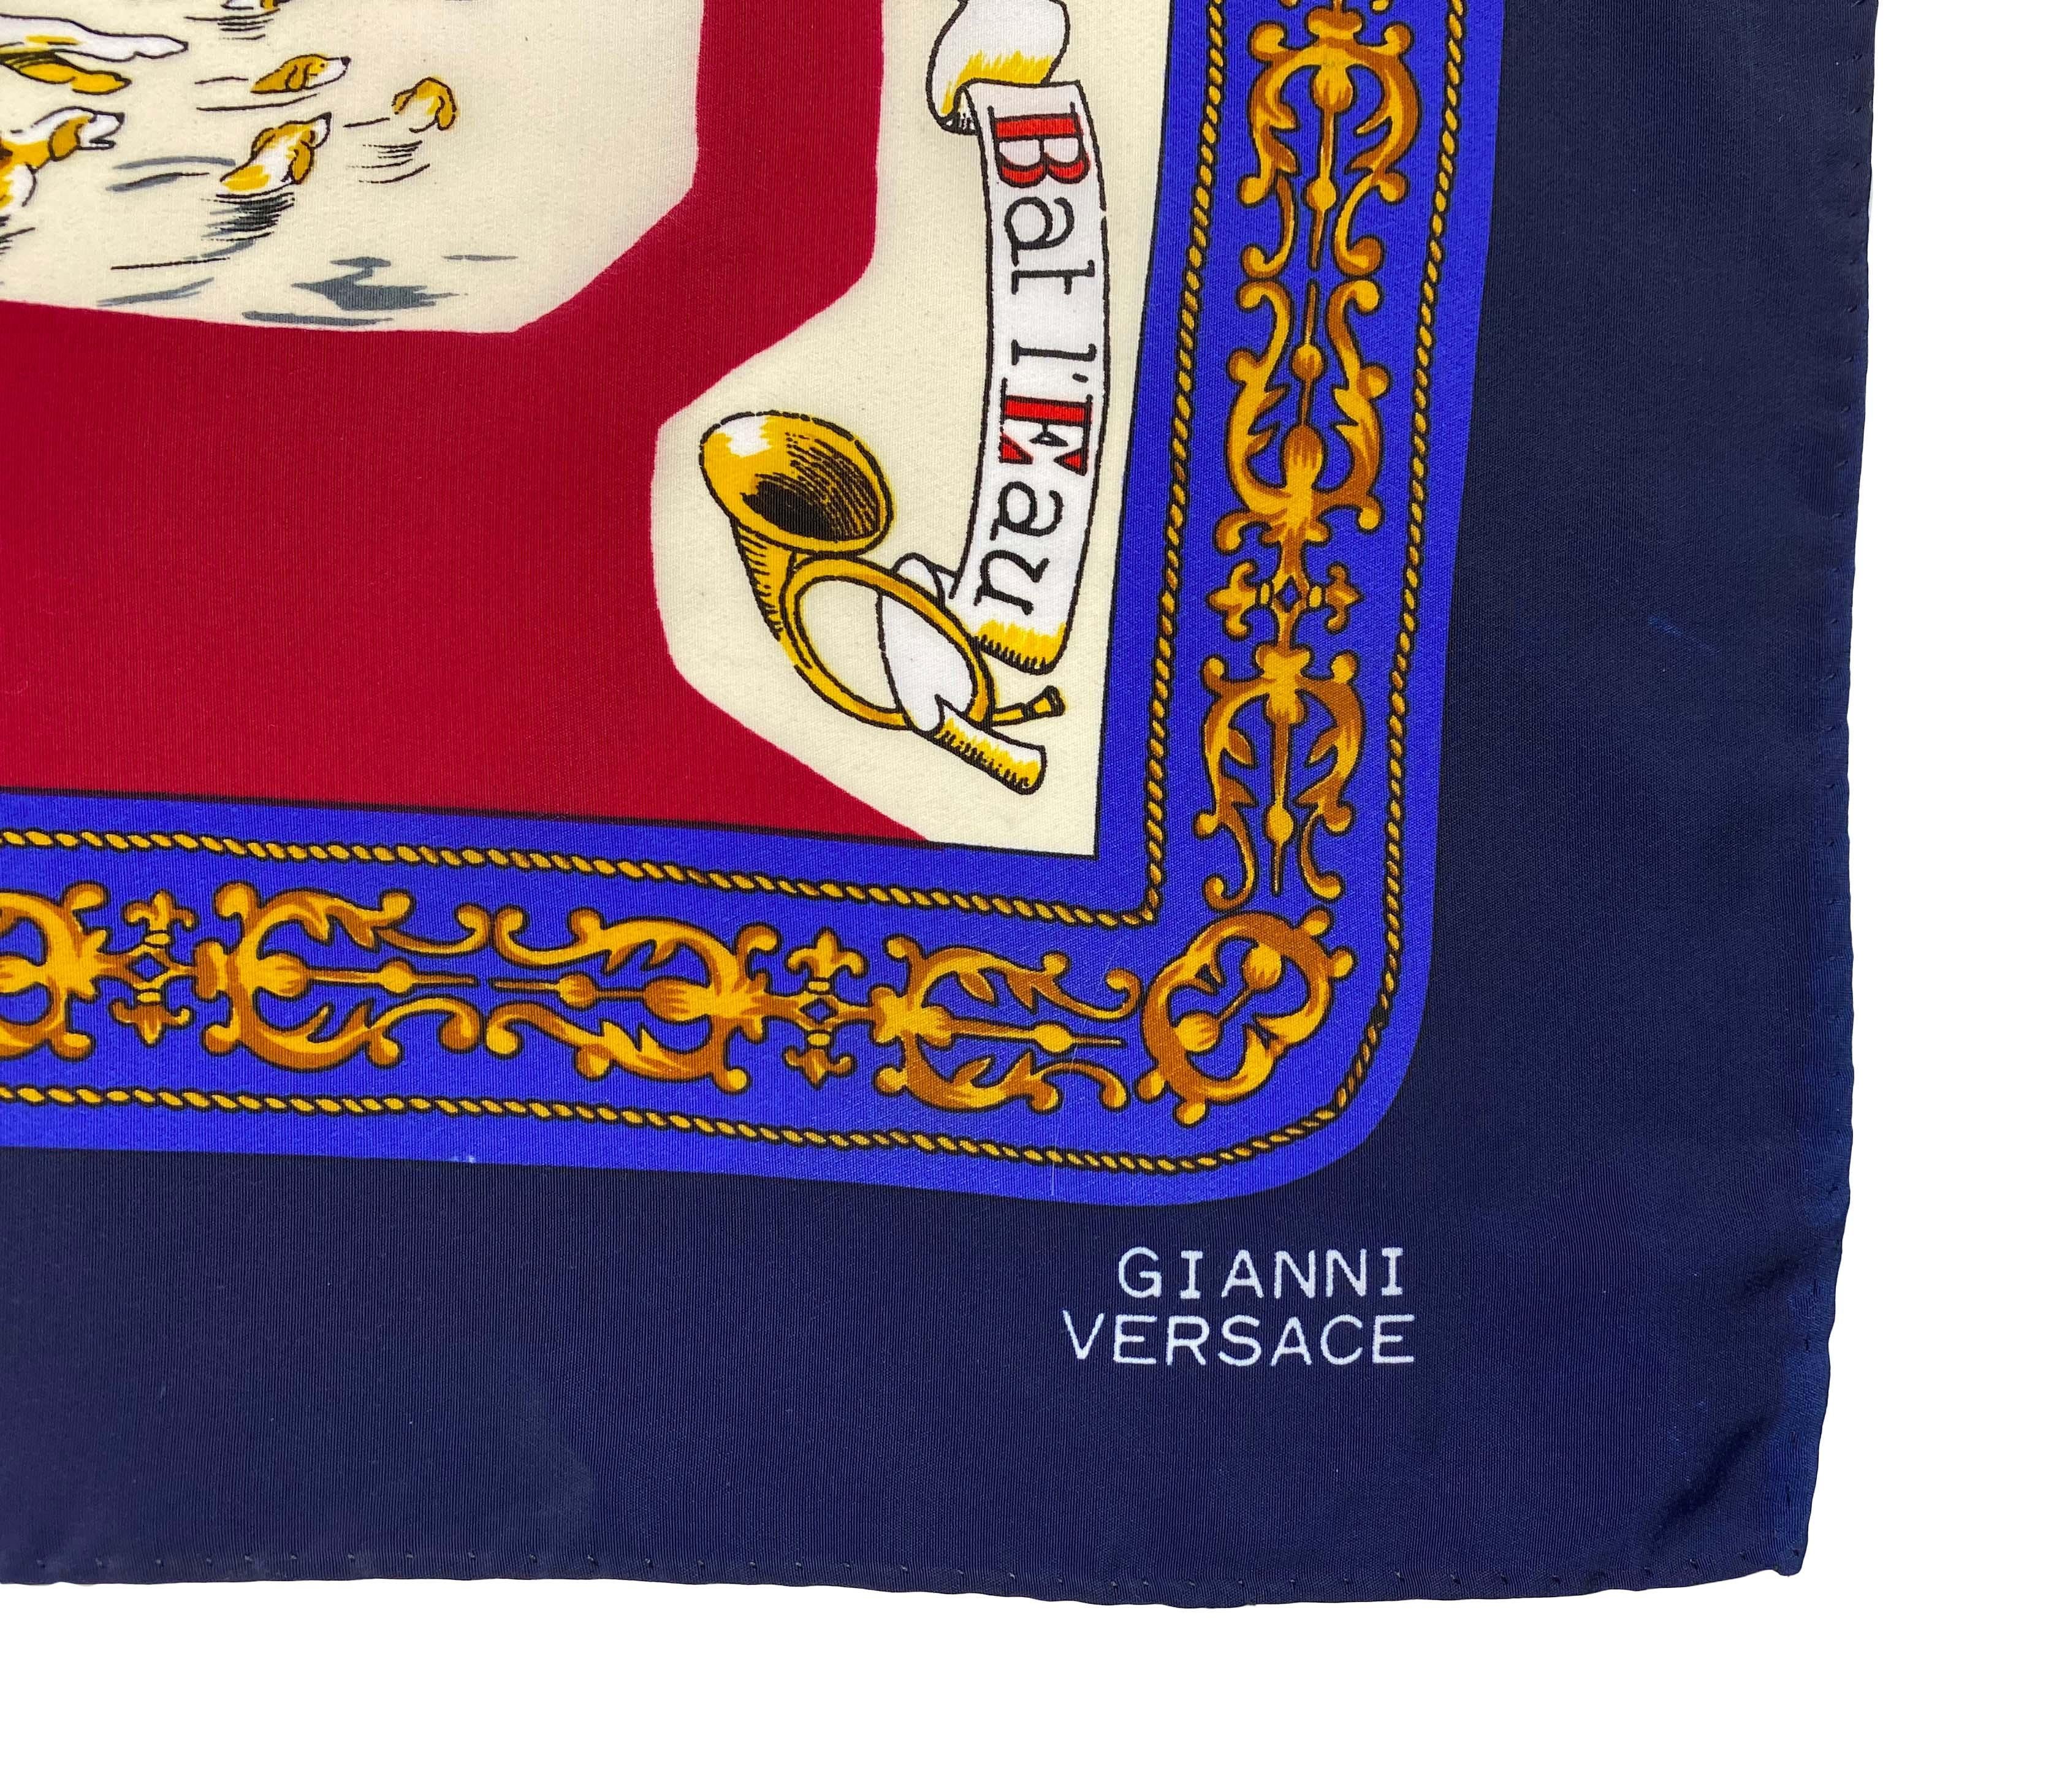 Gianni Versace Hunting Scene Silk Square Scarf In Good Condition For Sale In West Hollywood, CA